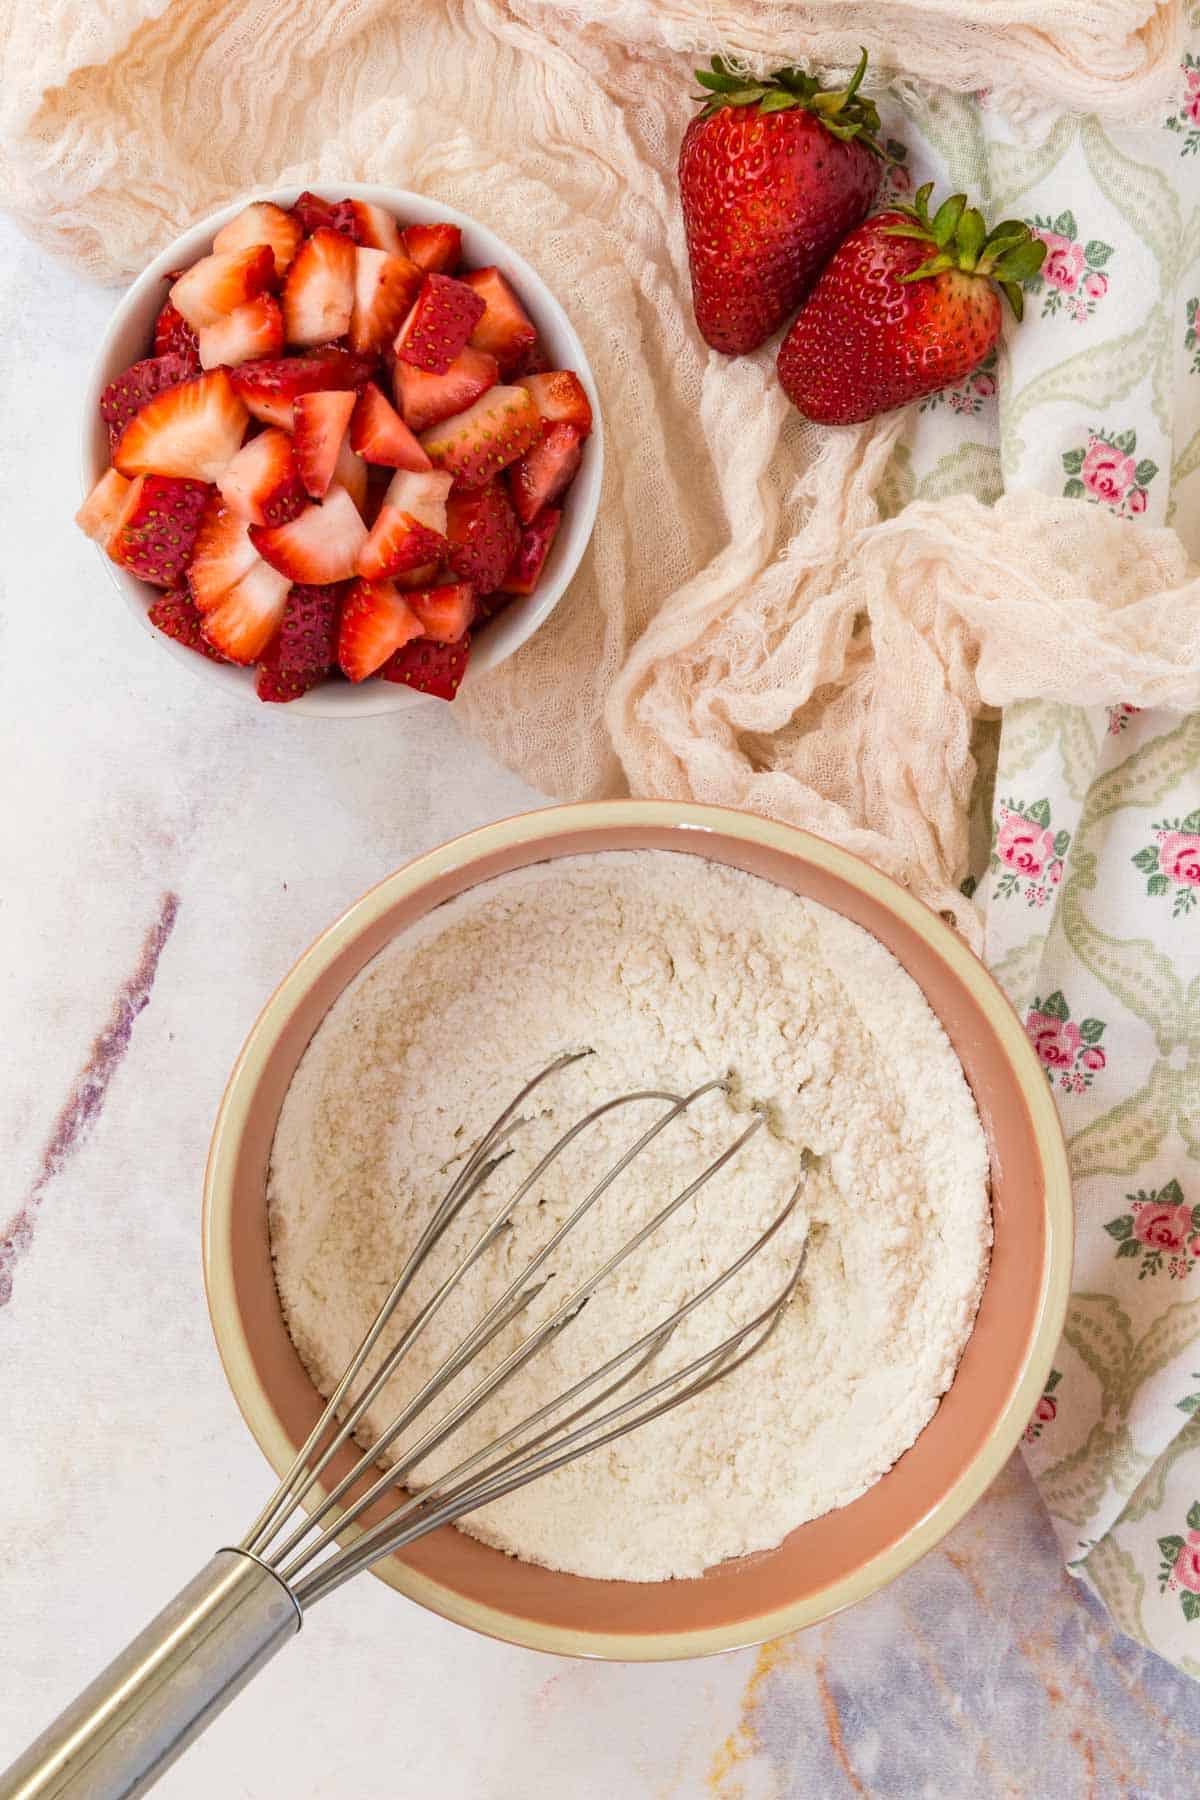 The dry ingredients for muffin batter are whisked together in a mixing bowl, next to a bowl of chopped strawberries.